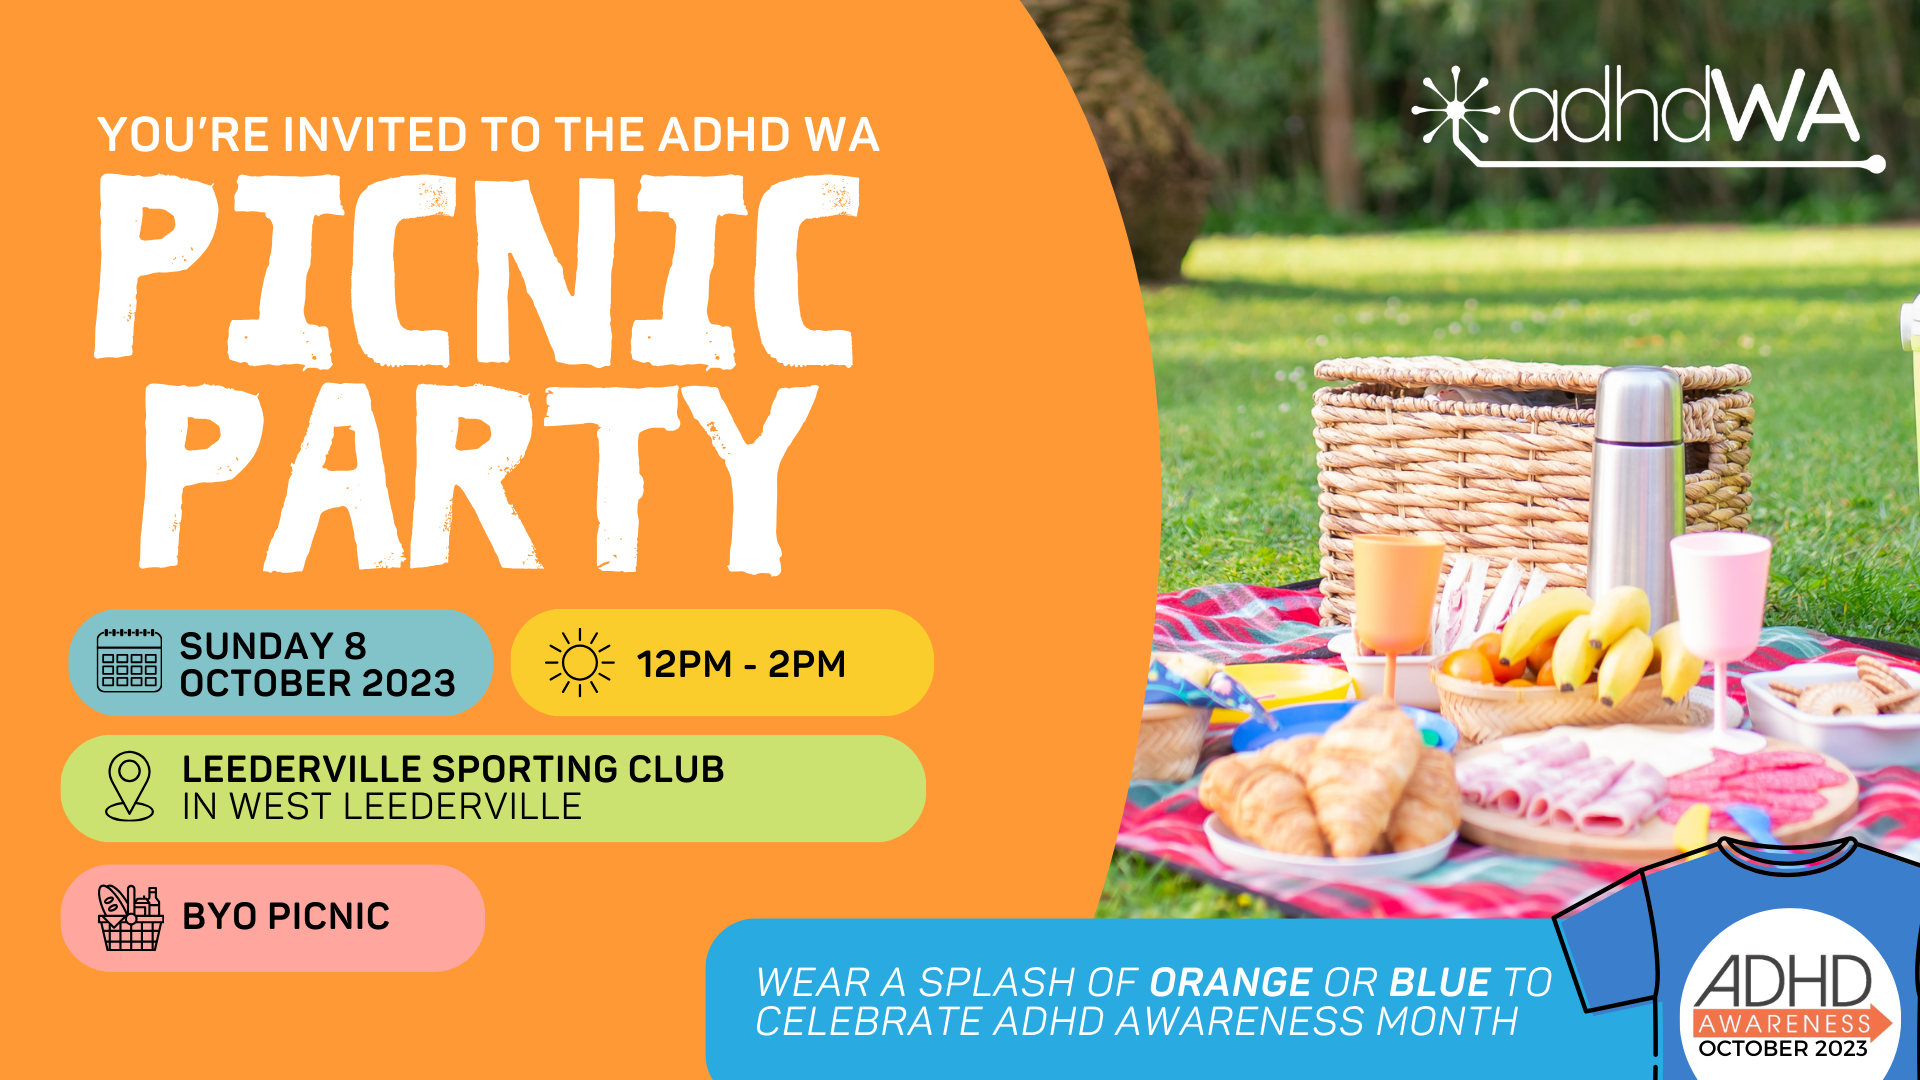 Invitation banner to the Picnic Party. Image of picnic spread and text listing the event details.